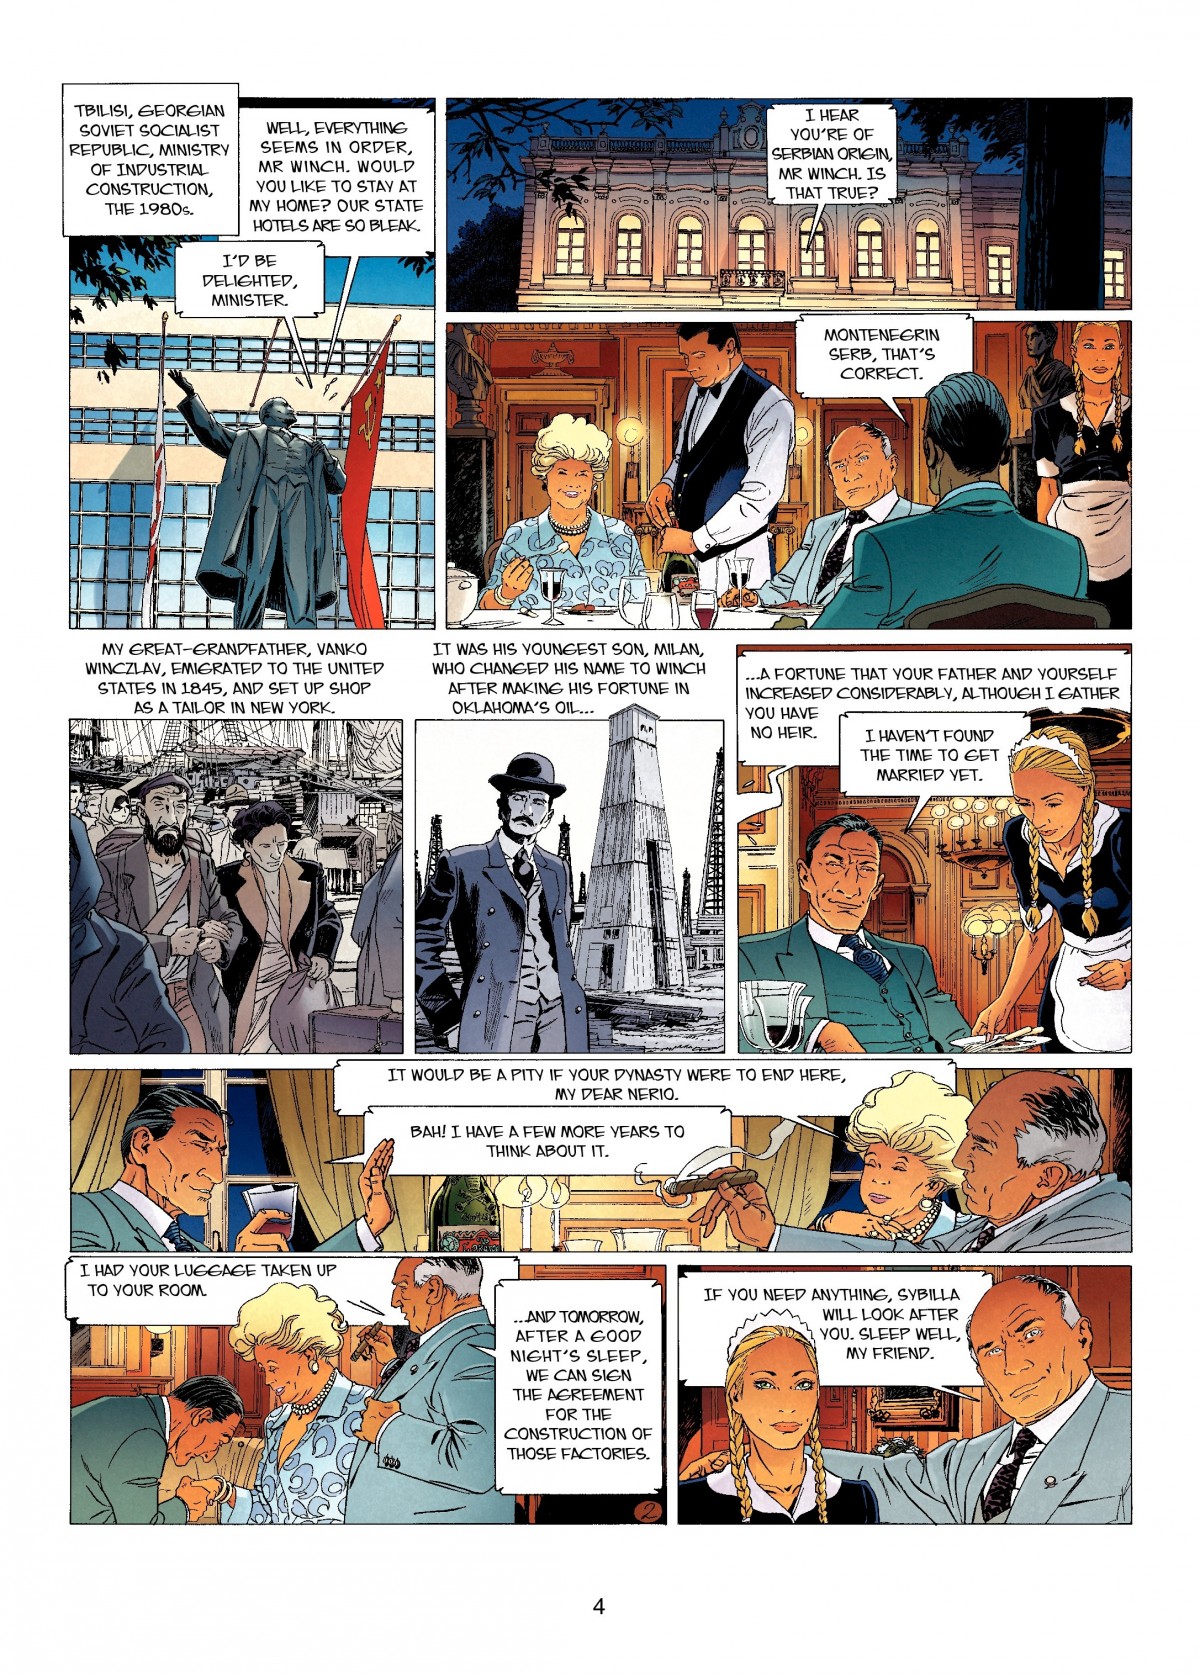 Largo Winch (1990-): Chapter 14 - Page 4